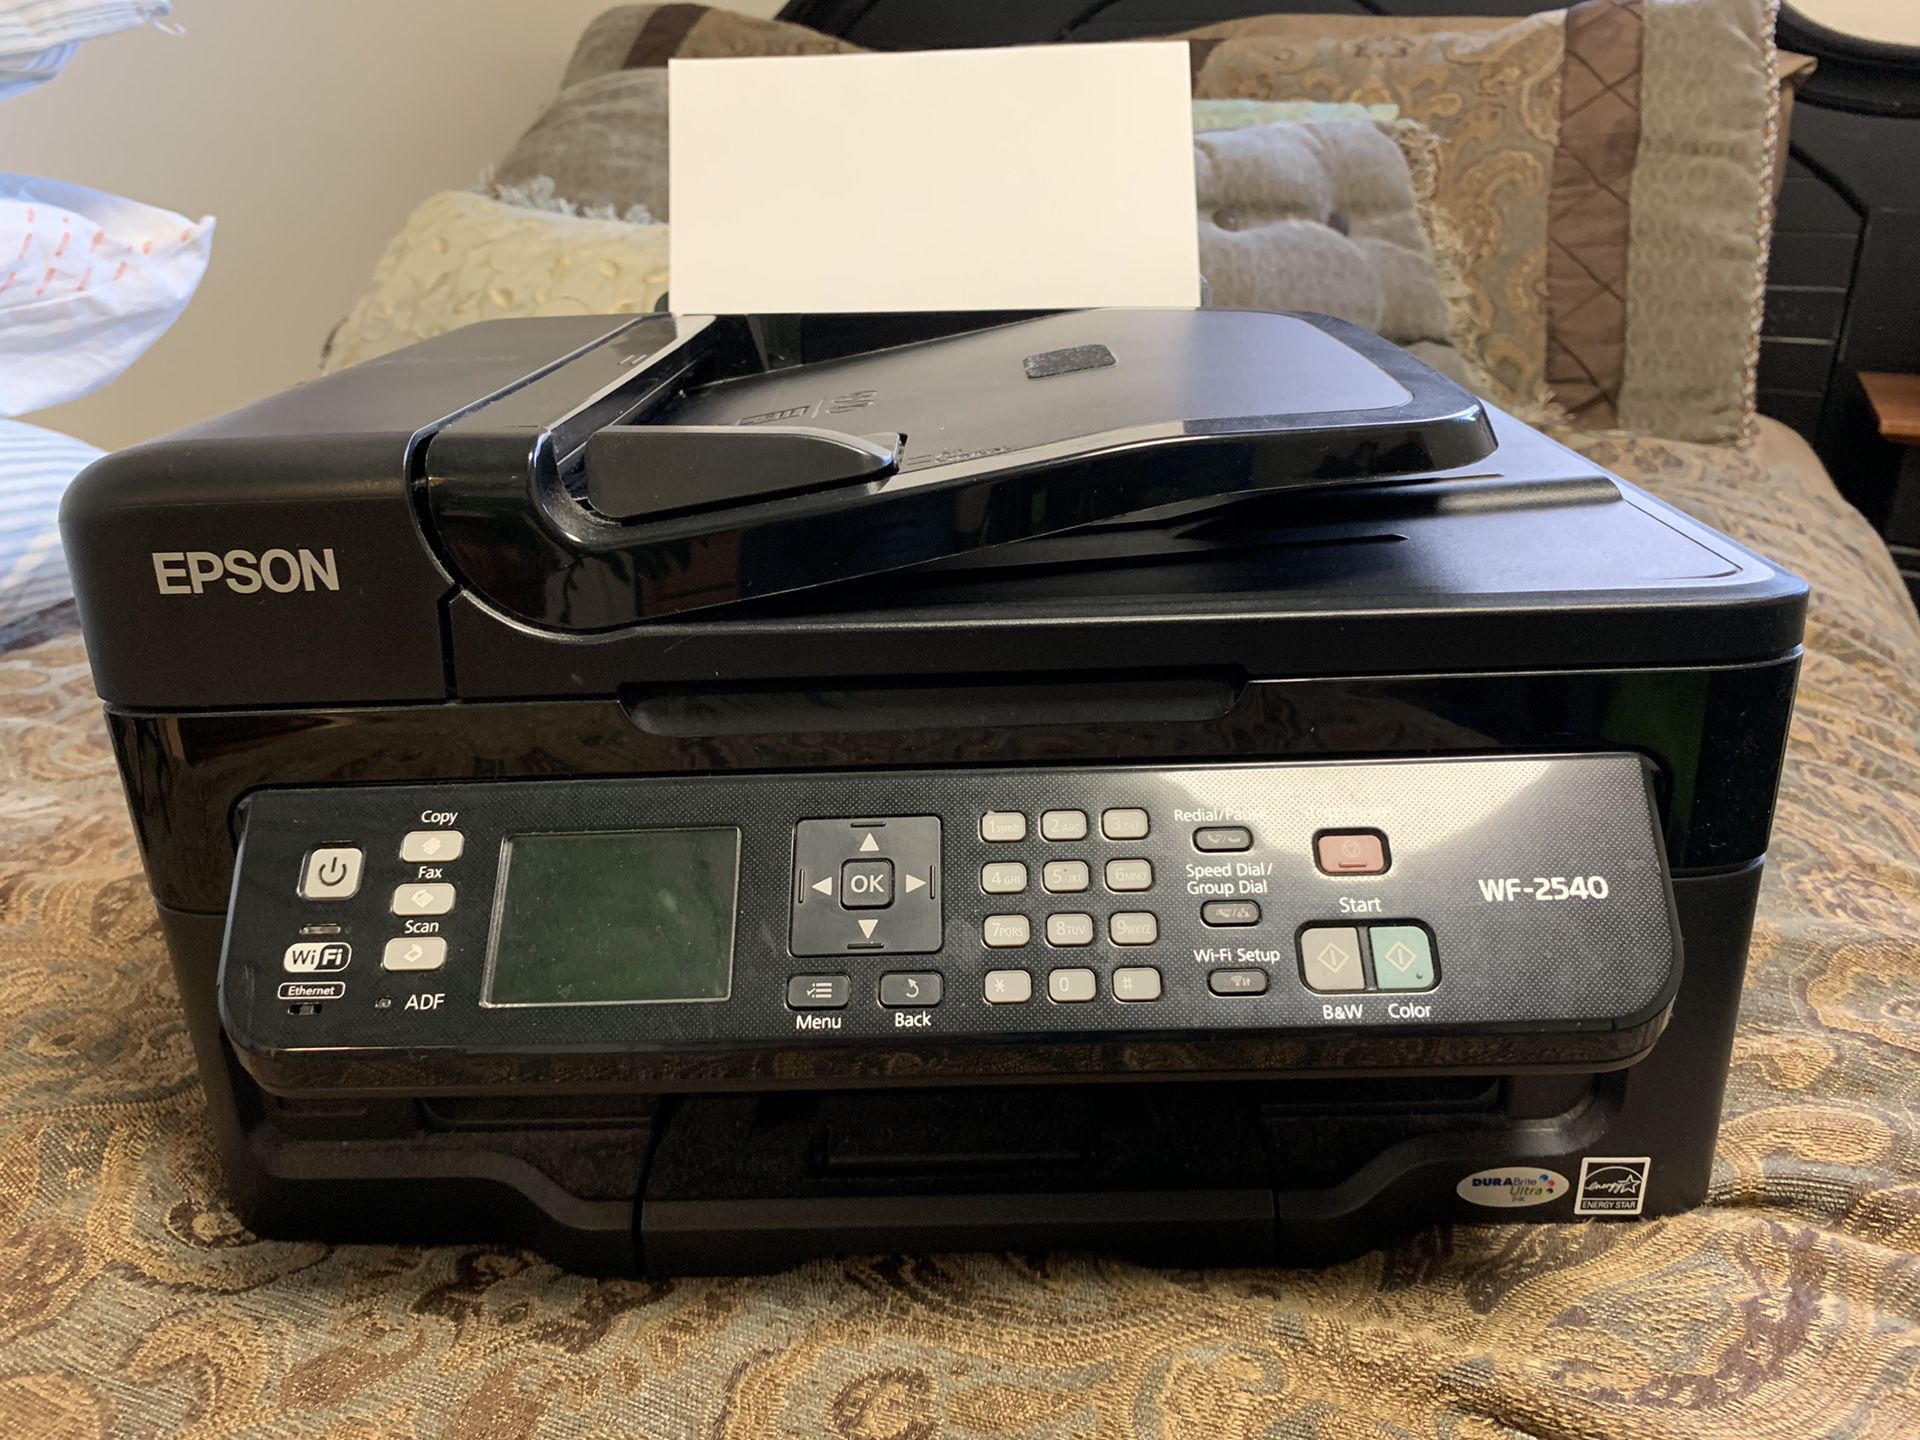 Epson All-in-1 printer scanner fax